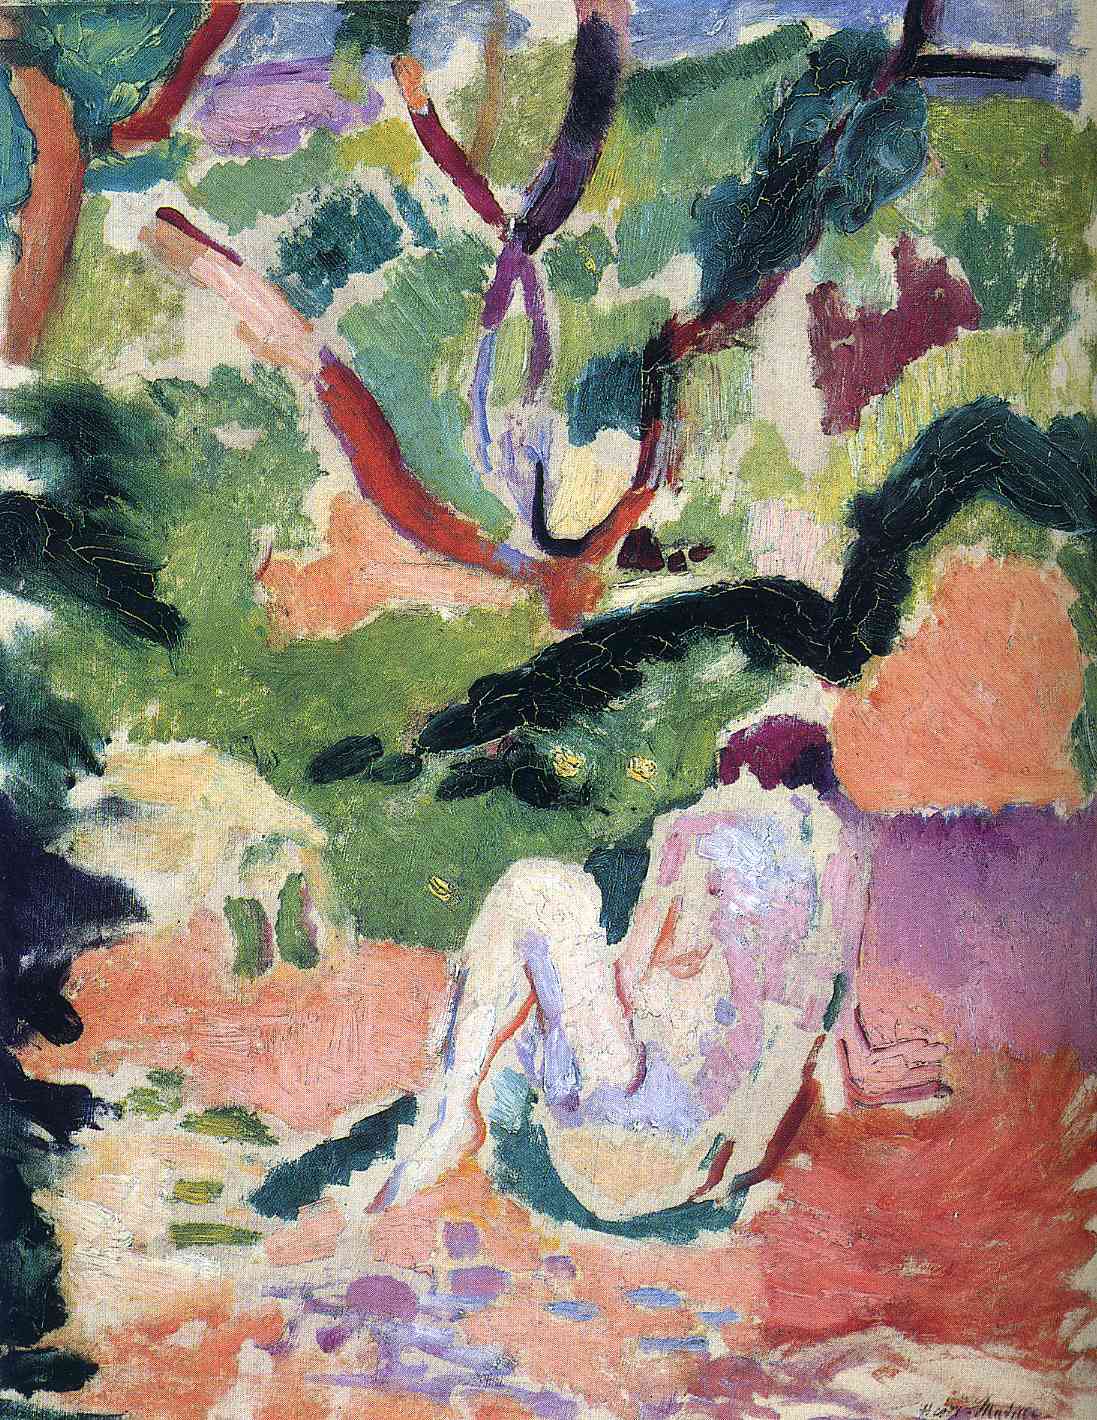 Nude in a Wood (1906).